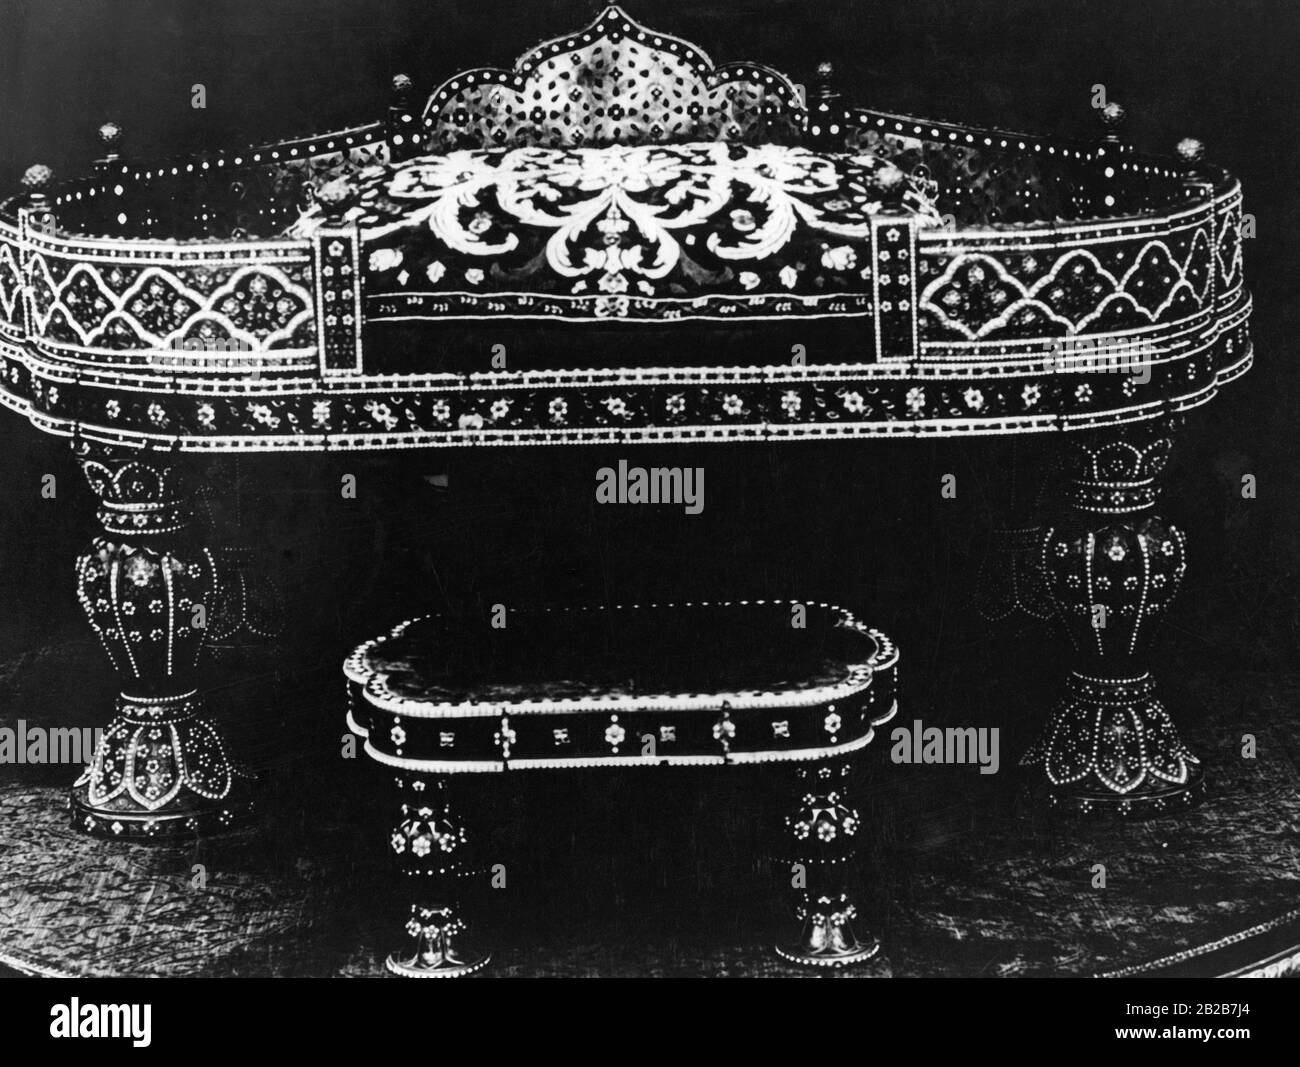 A famous Persian throne in the form of a piano, which was stolen by the Ottomans in one of the wars against Persia. It is now on display at a public exhibition in the Topkapi Palace in Istanbul. Undated photo. Stock Photo